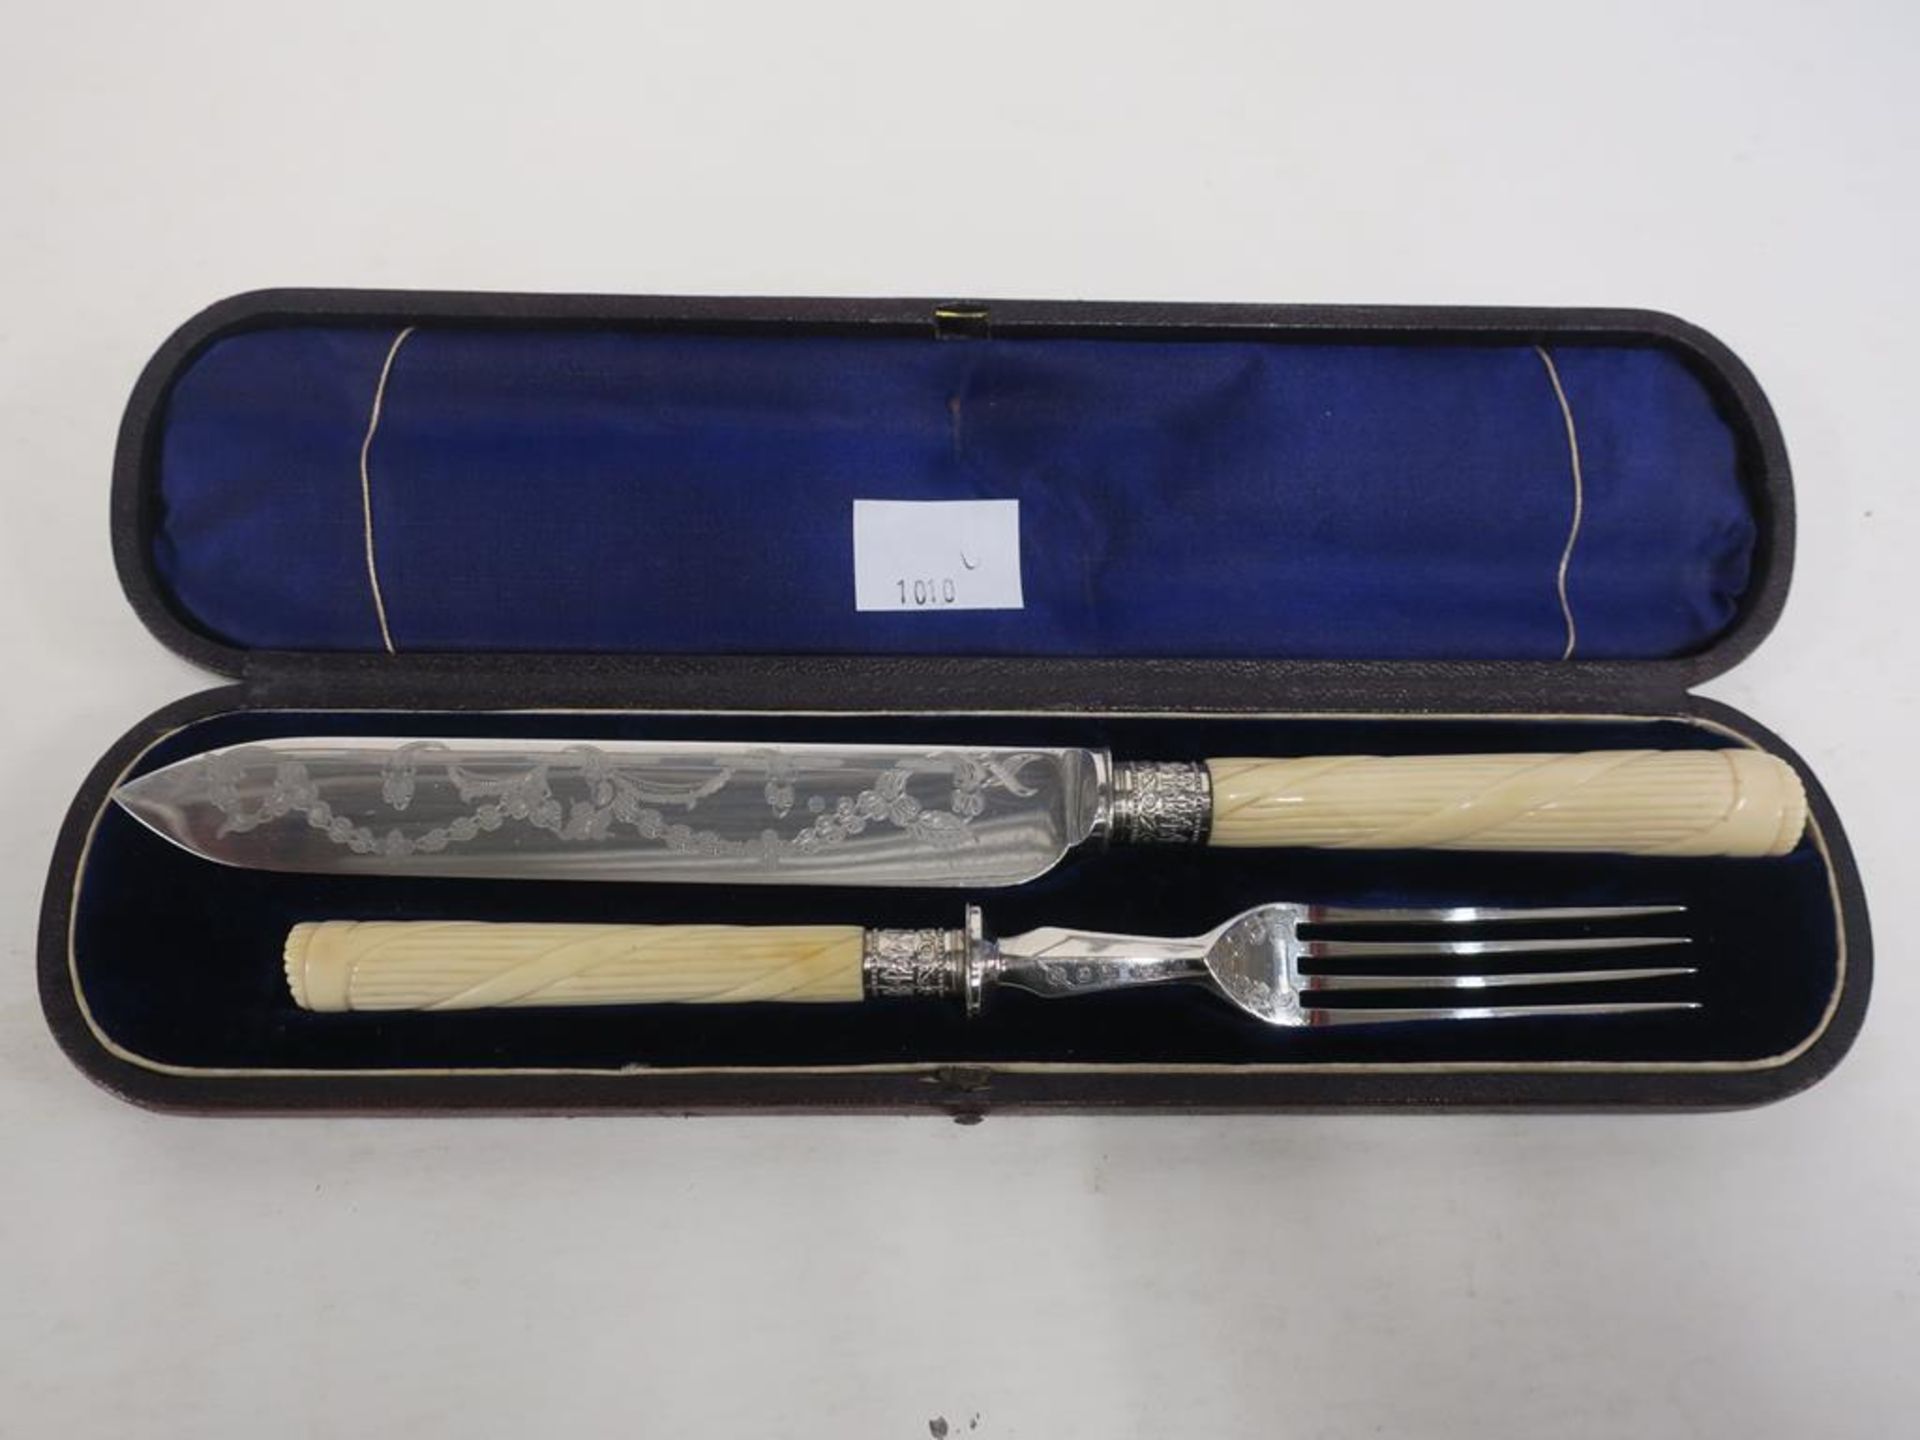 A Victorian Silver Plated Carved Bone Handled Carving Set (pair) in fitted case c 1880 (est £30-£